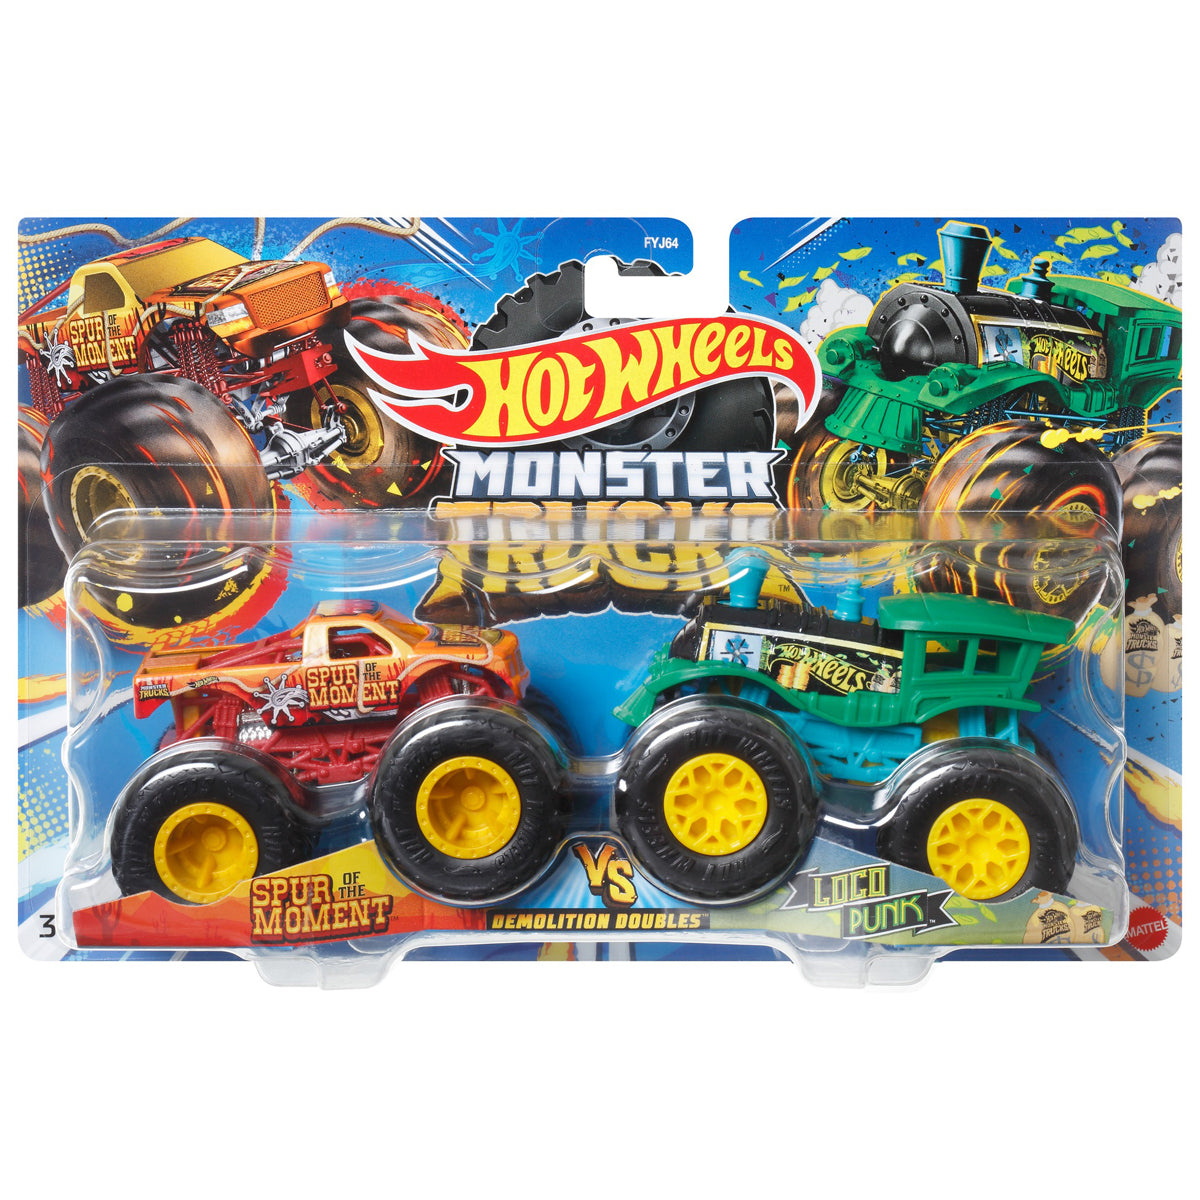 Hot Wheels Monster Trucks Demolition Doubles Spur Of The Moment VS Loco Punk